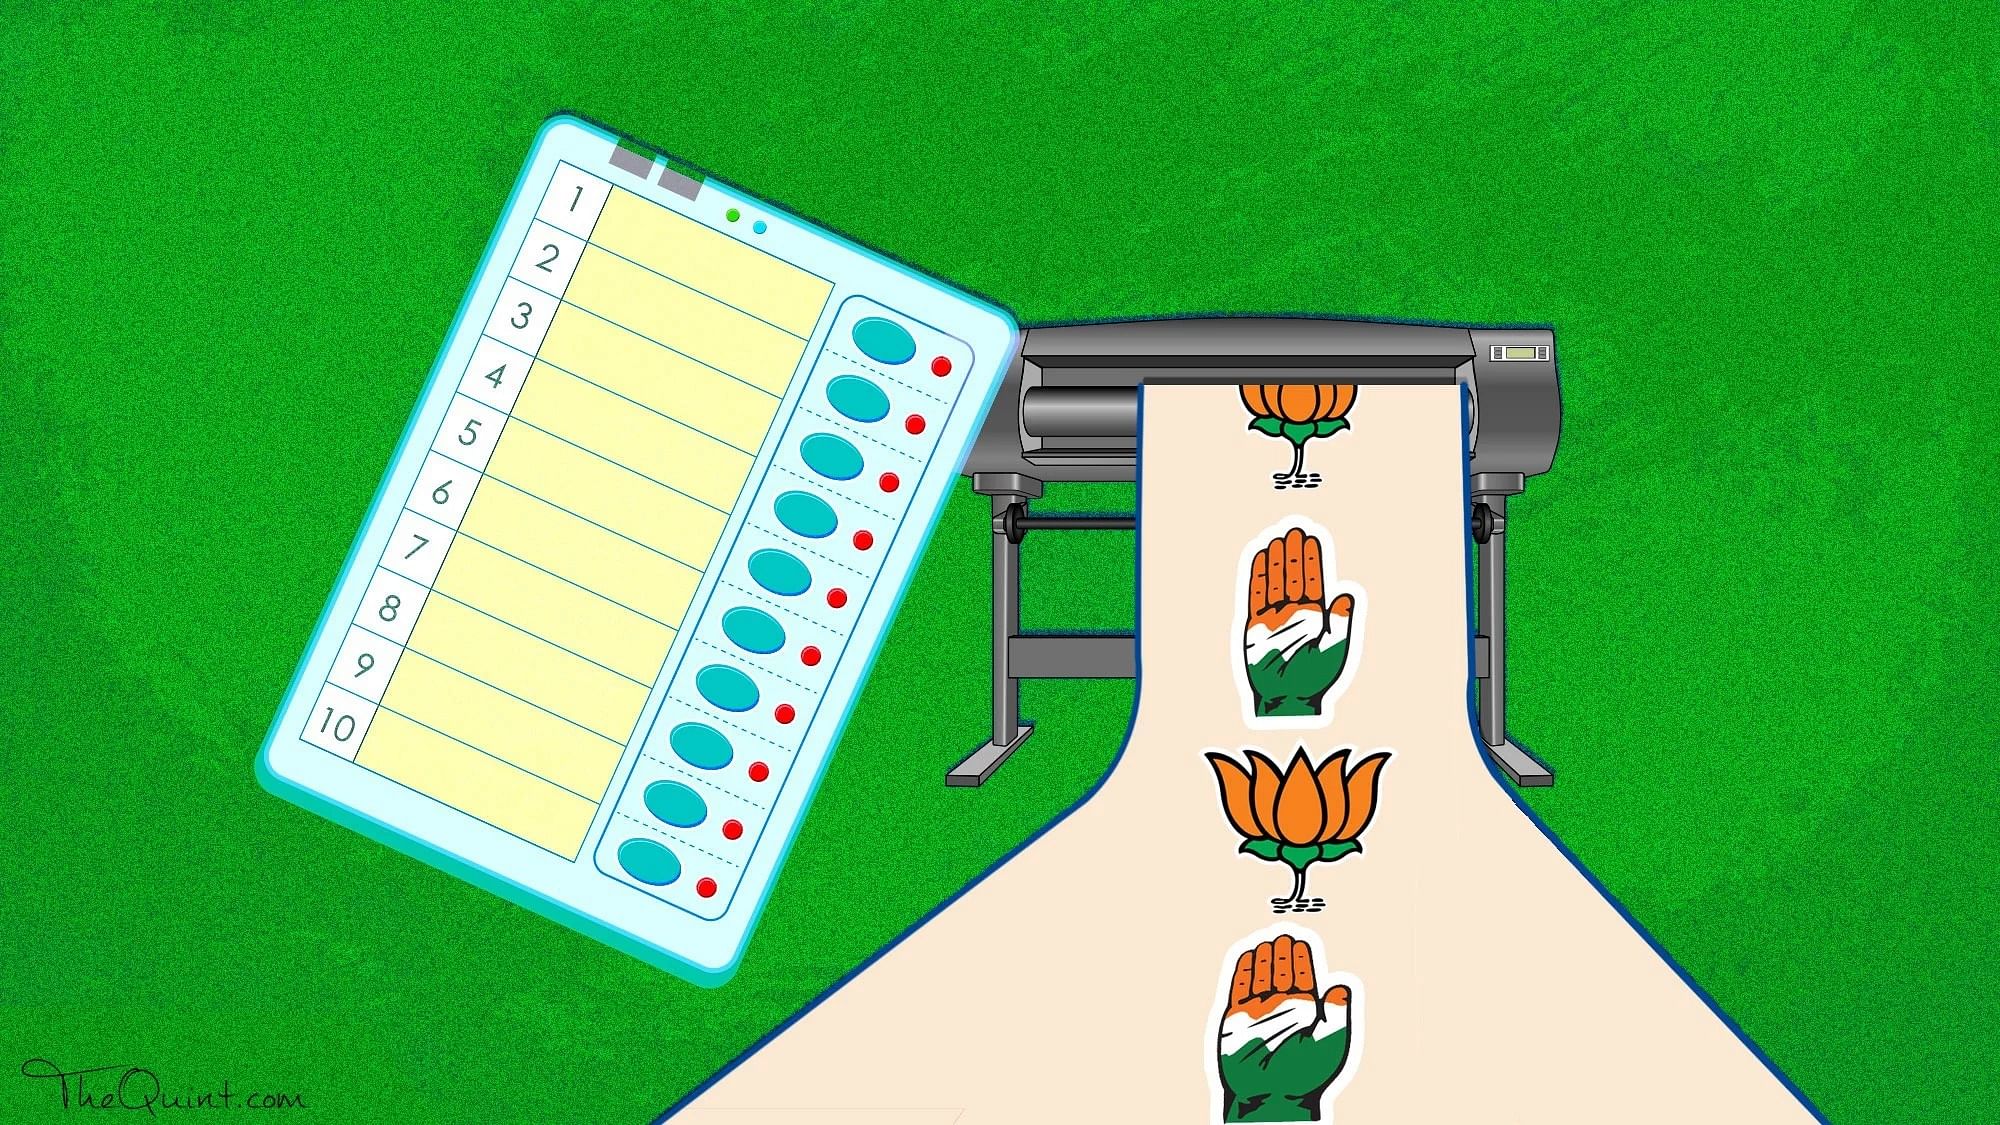 Phase one of Gujarat elections was marred by allegations of faulty EVMs and EVM tampering via Bluetooth.